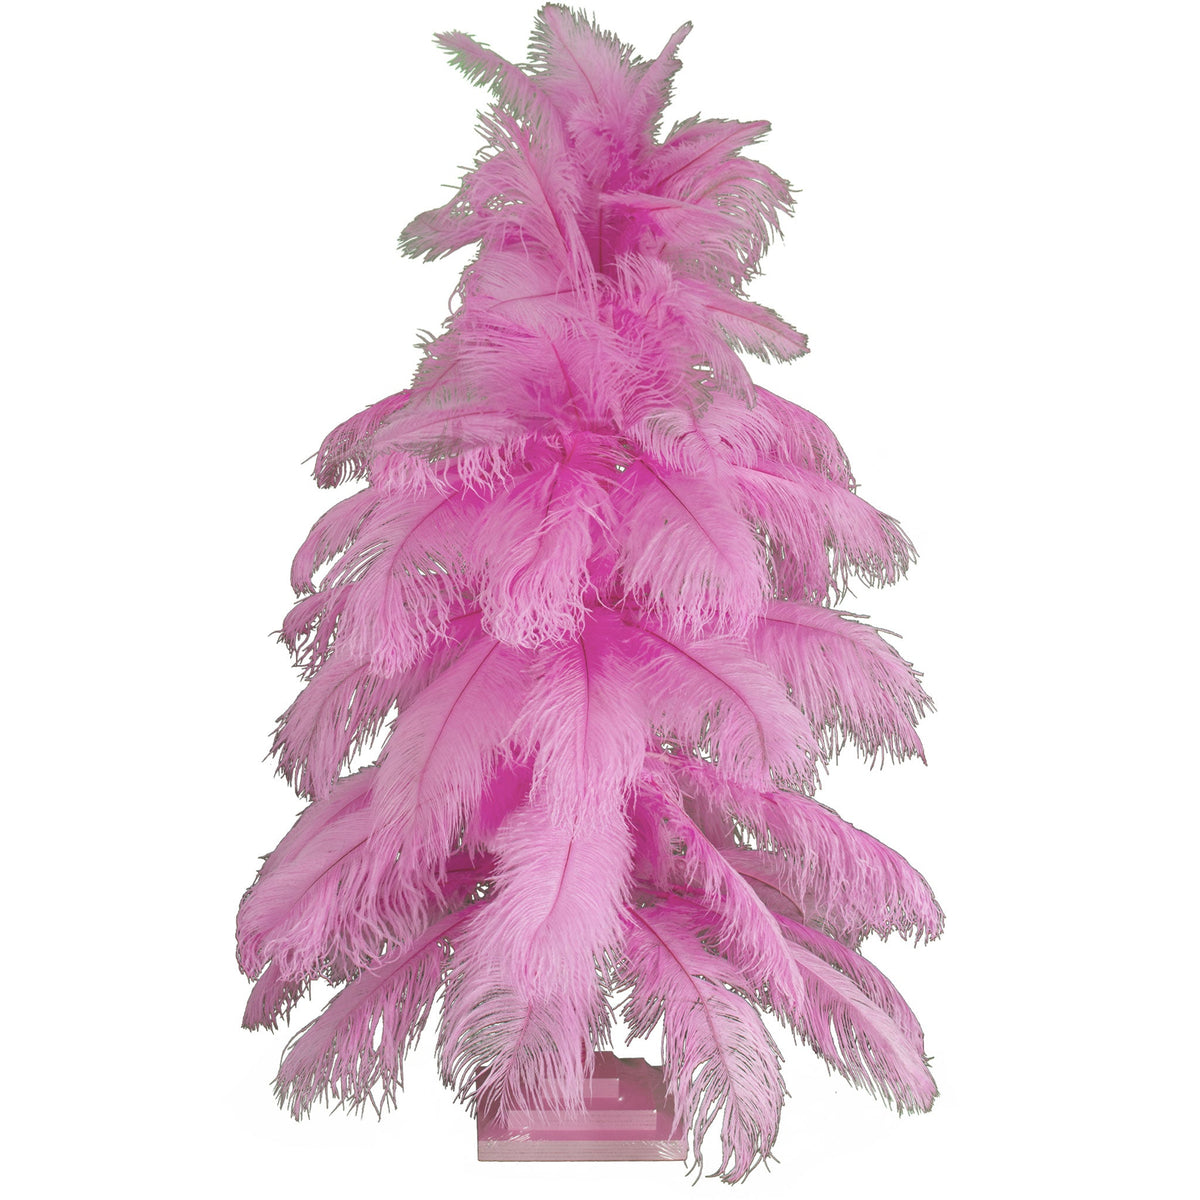 Introducing Lee Display's brand new 3FT TallPink Ostrich Feather Christmas Trees! Made with real ostrich feathers